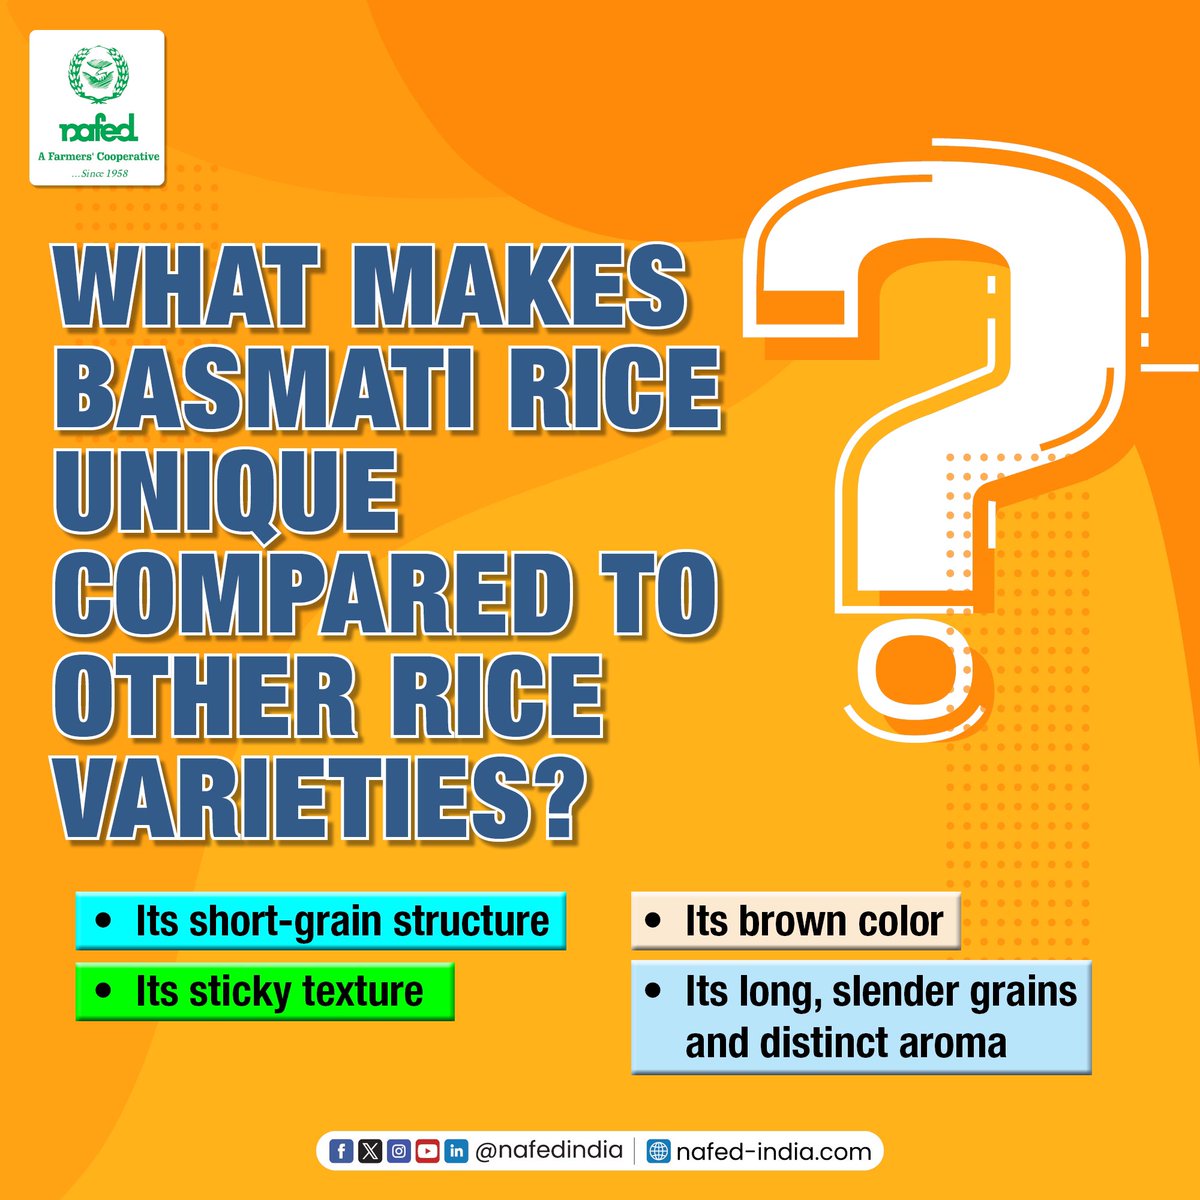 Can you guess what makes Basmati rice stand out? Share your answers in comment section.

#NAFED #NAFEDIndia #DoYouKnow #Nafedquiz #rice #basmatirice